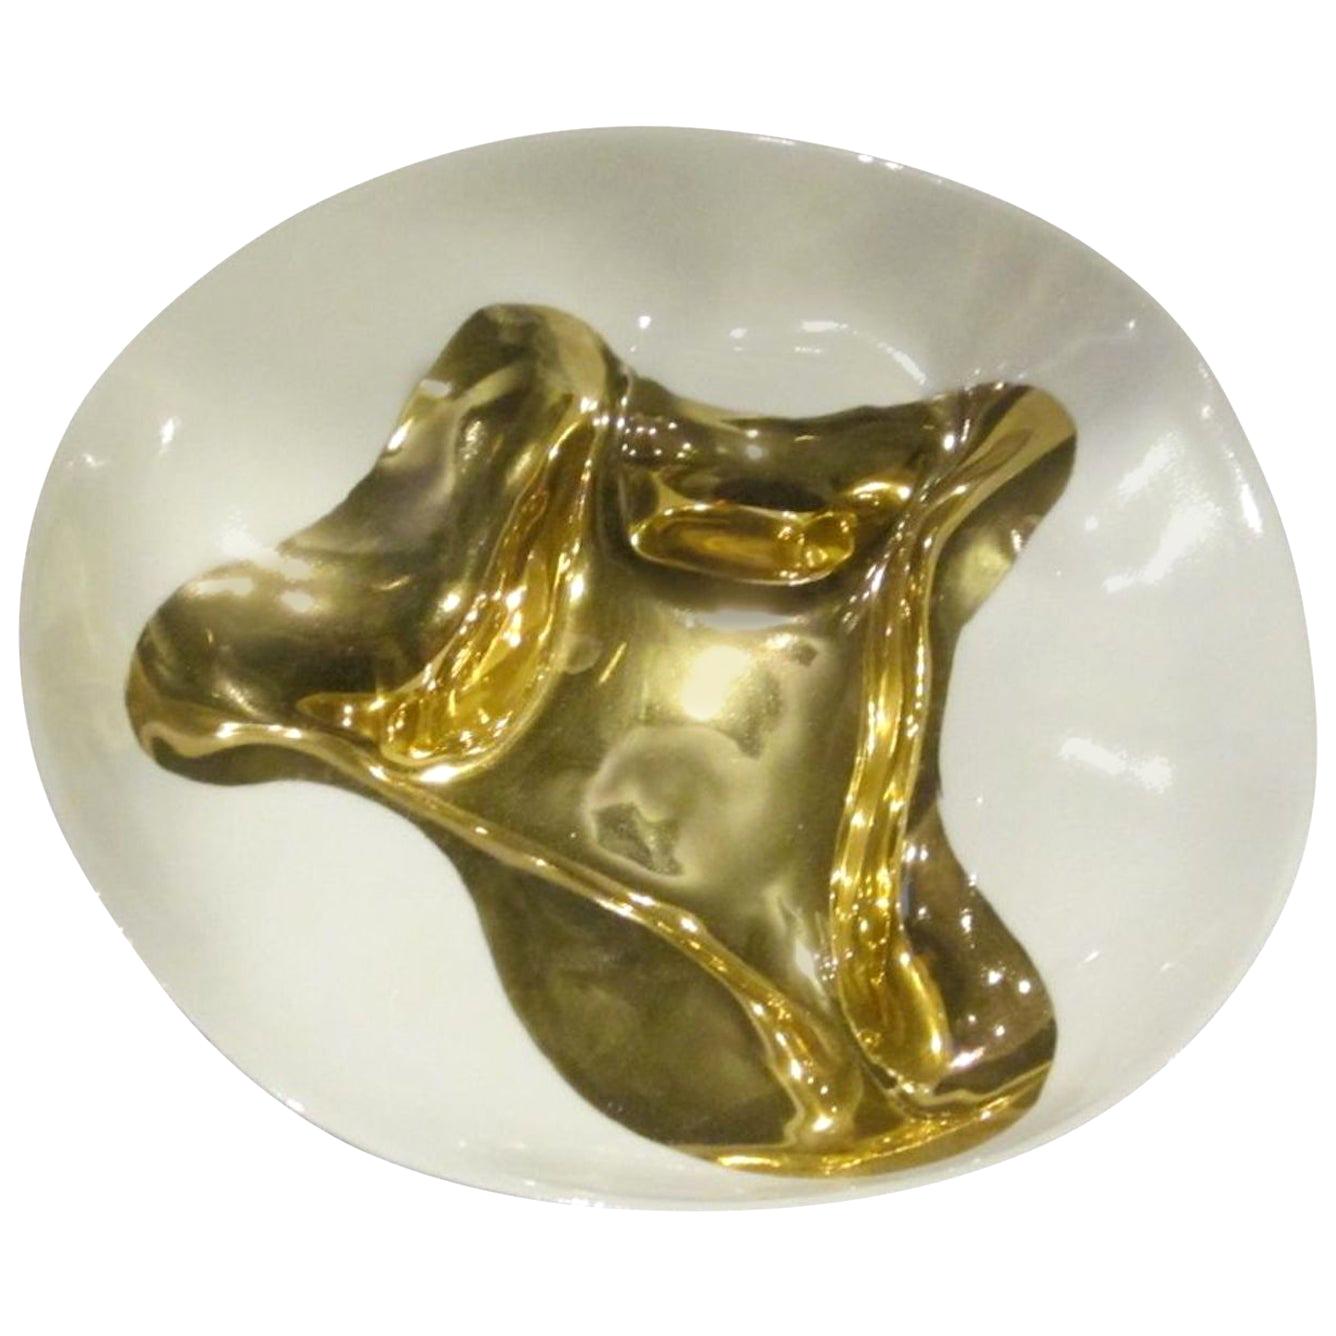 Gold Leaf Flame Design Bowl, Italy, Contemporary